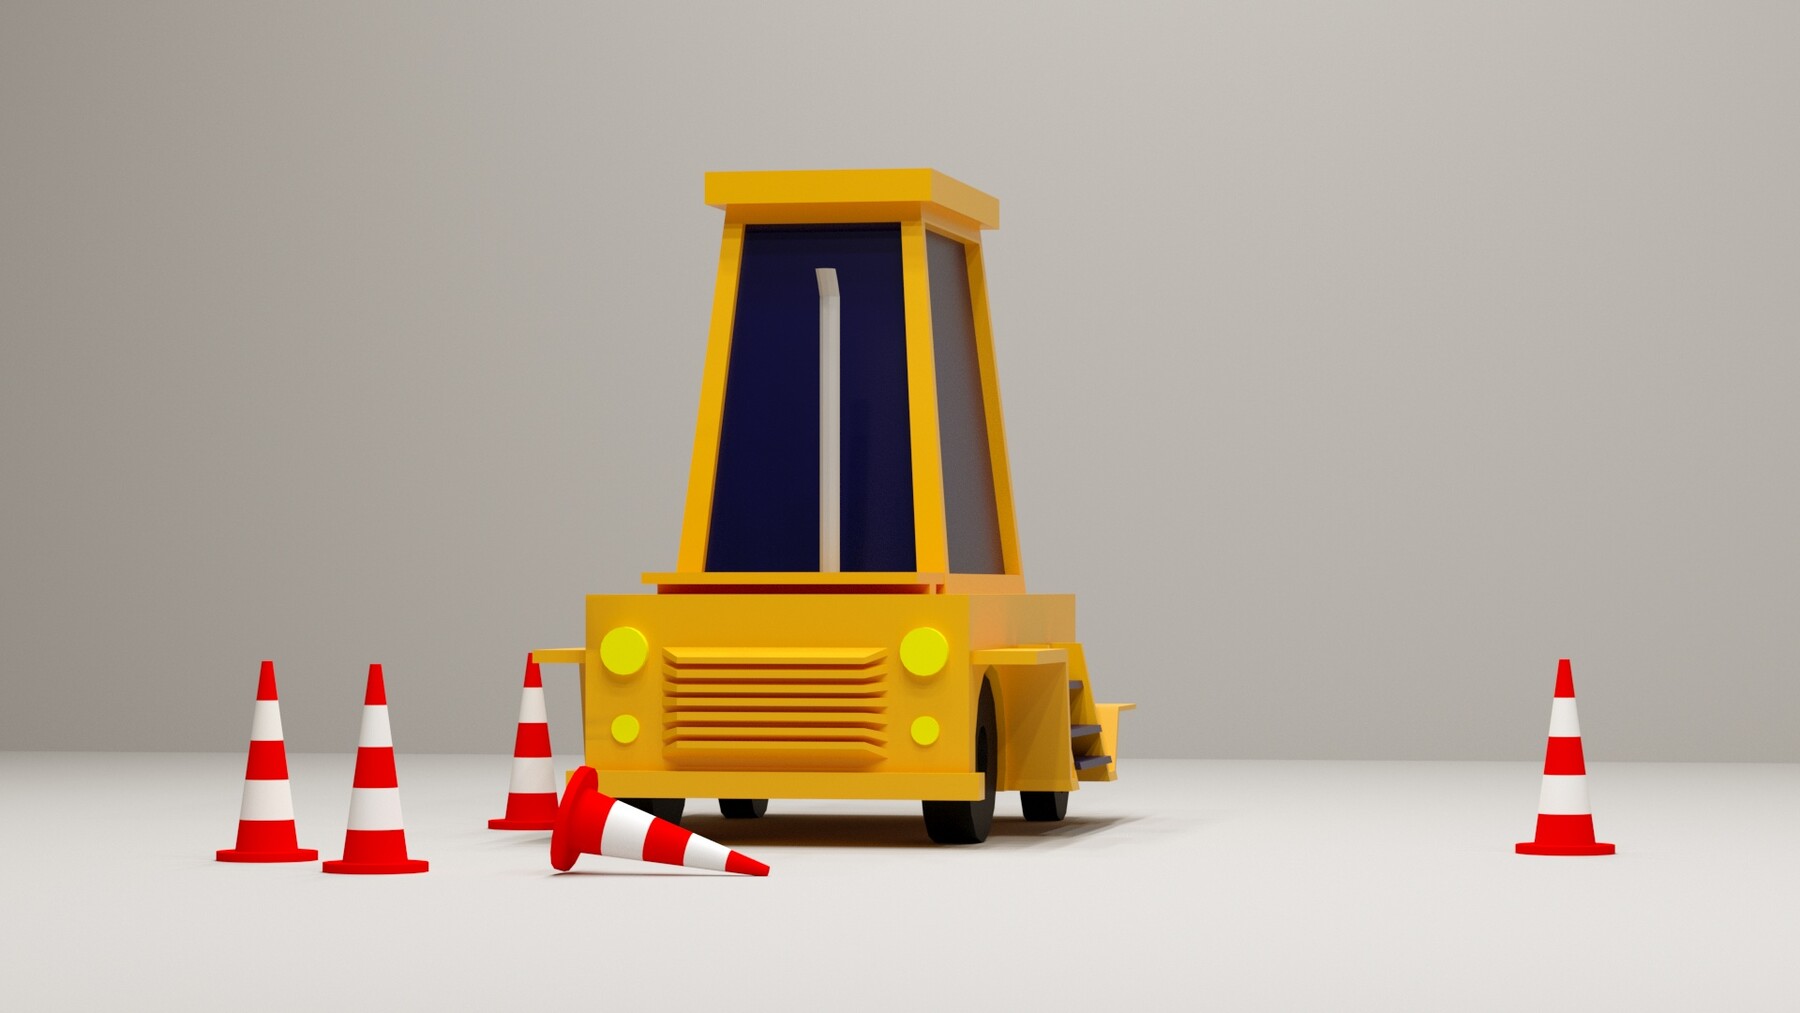 ArtStation - Cartoon Low-Poly JCB Car for game-ready Low-poly 3D model |  Game Assets